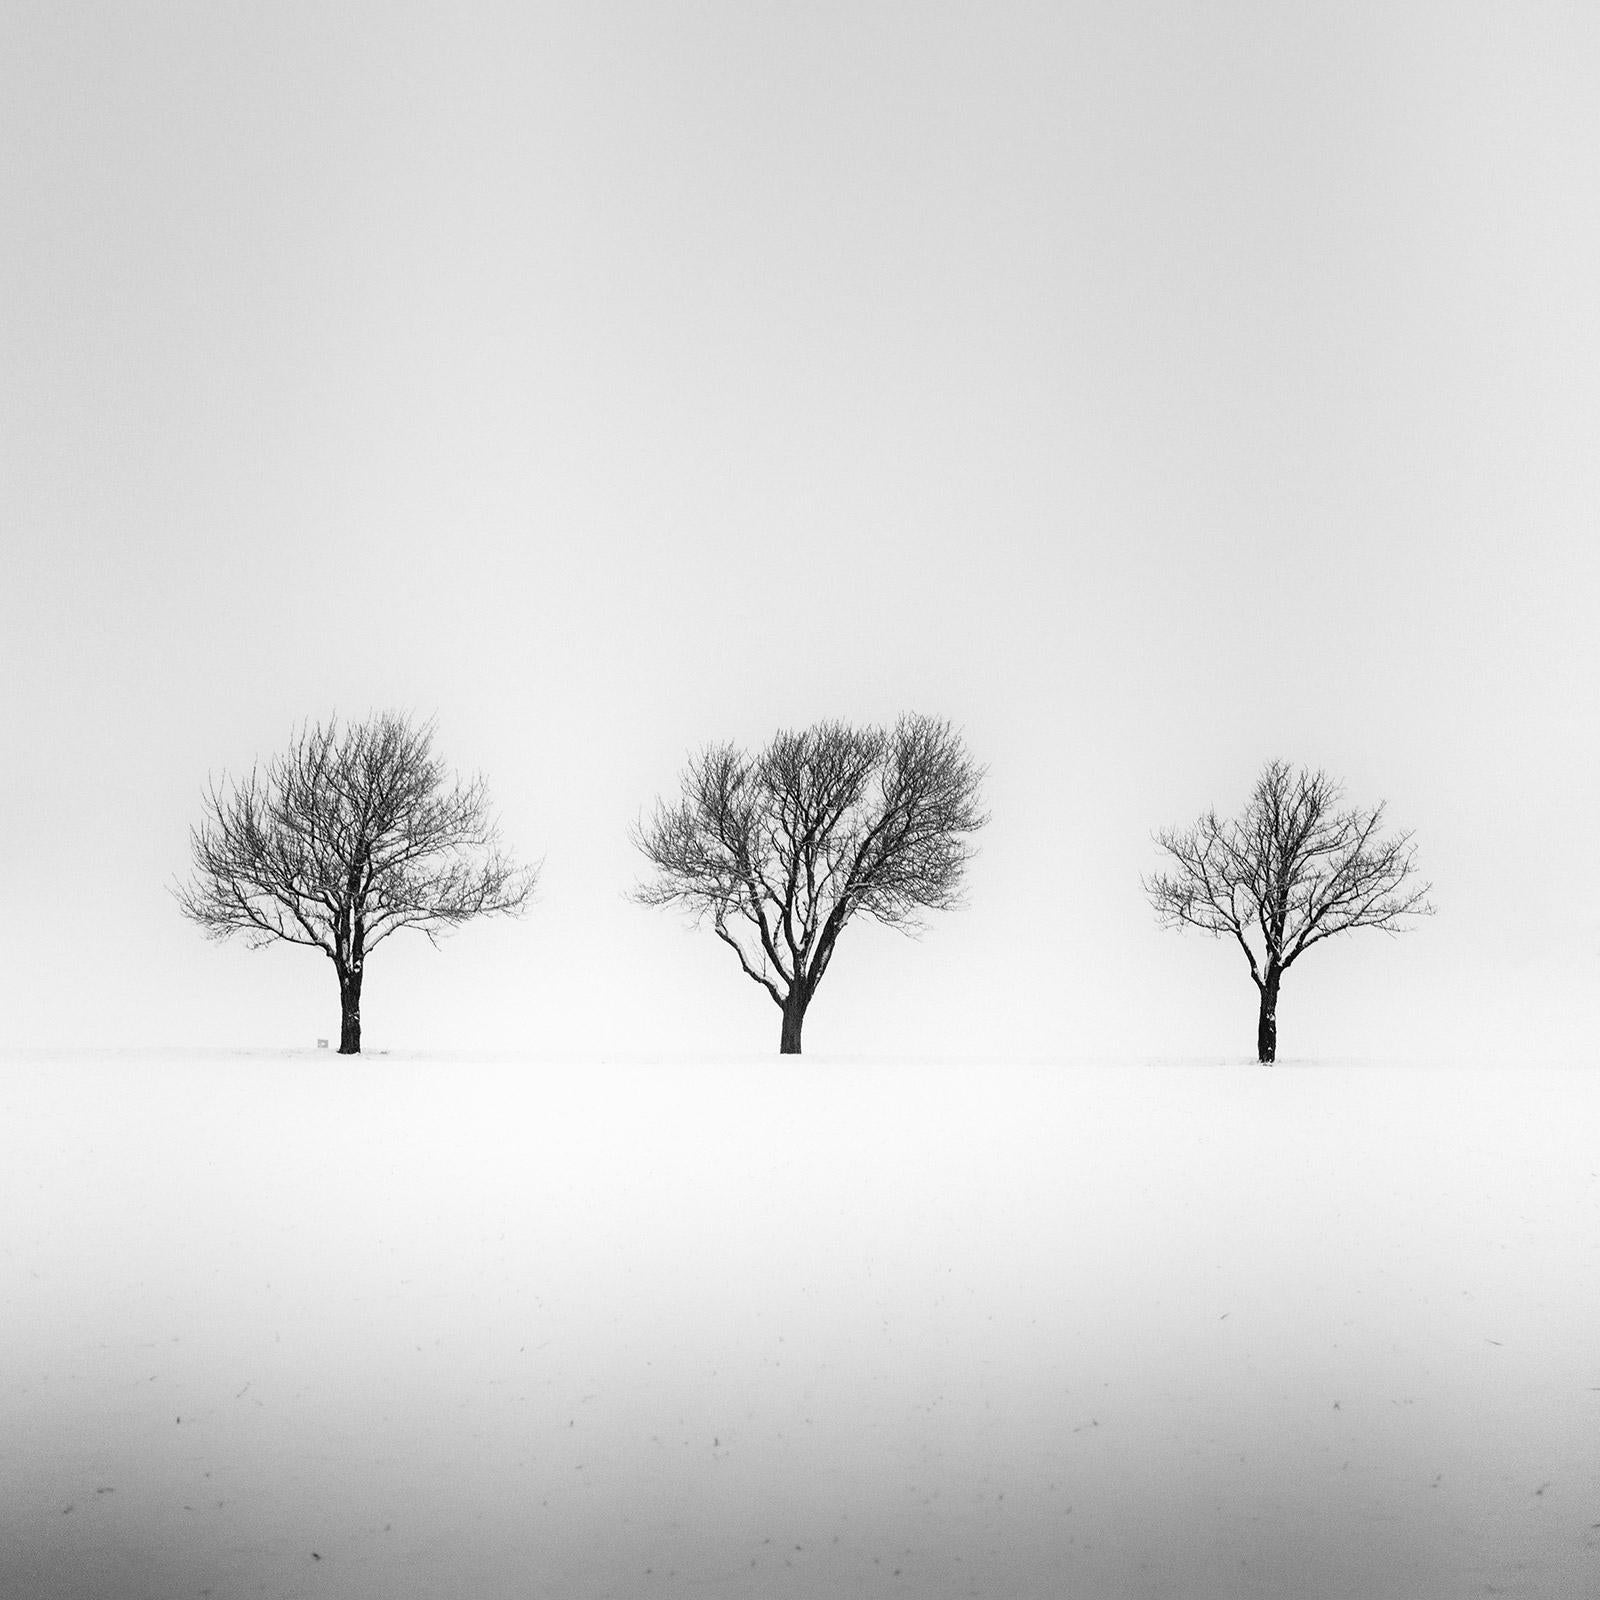 Gerald Berghammer Landscape Photograph - Trees in snowy Field, winterland, black and white photography, art, landscape